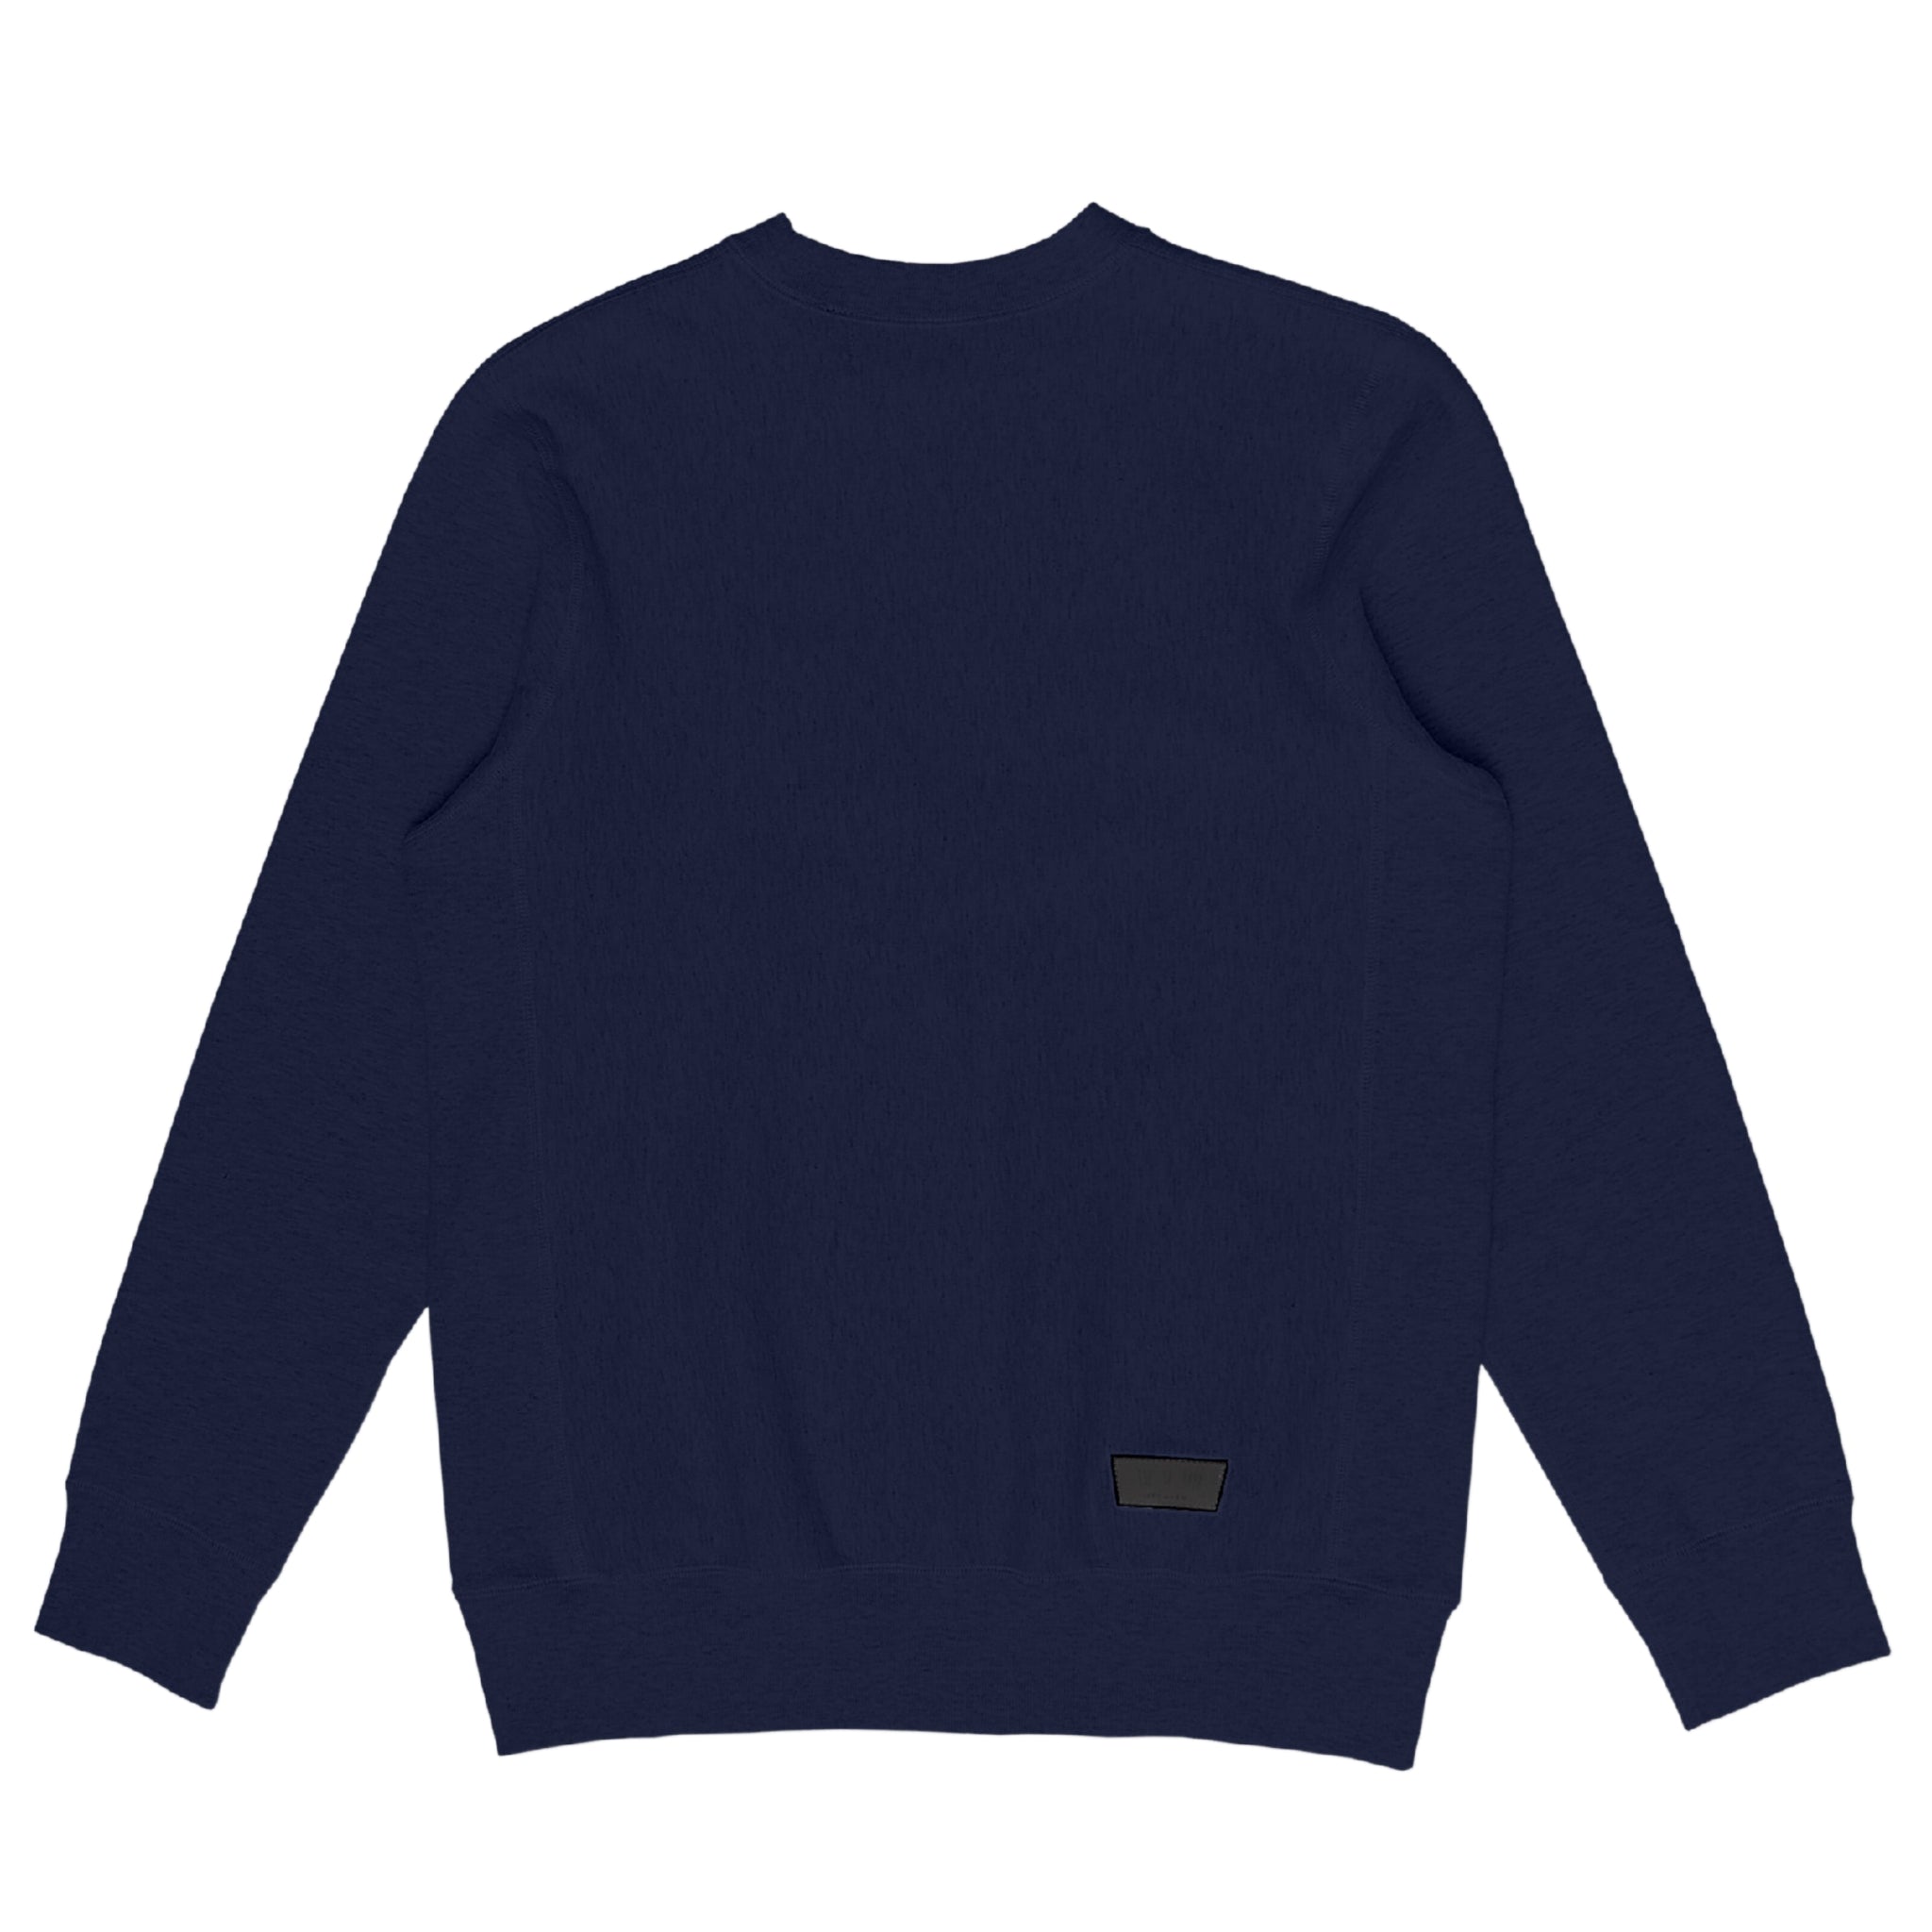 back view of a Bedi' "second life" program navy crewneck against a white background